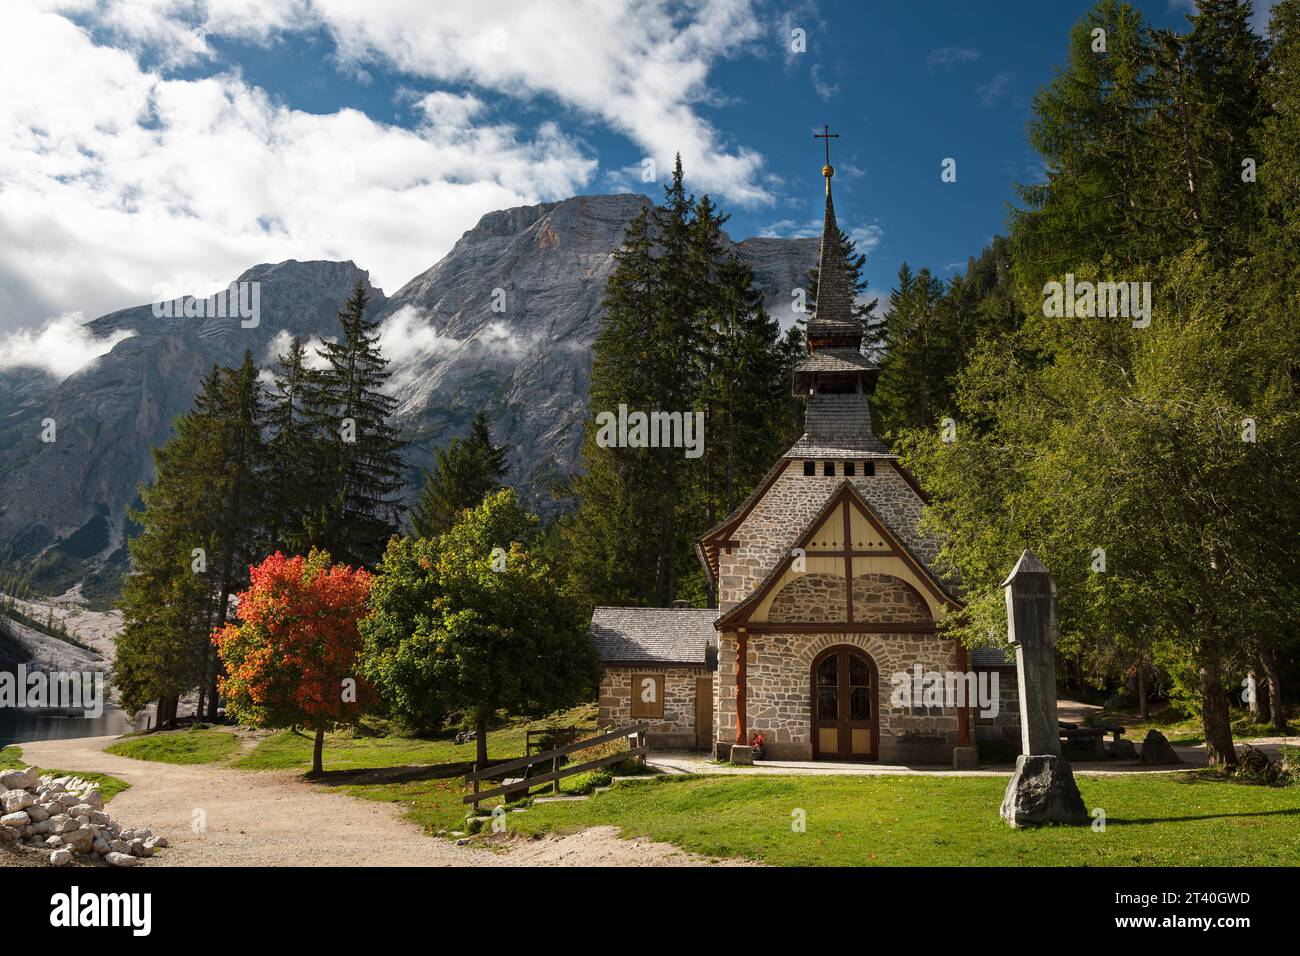 'Marienkapelle am Pragser Wildsee' also known as the Chapel of our lady is a small Catholic chapel located on the shores of Lago di Braies, Dolomites. Stock Photo